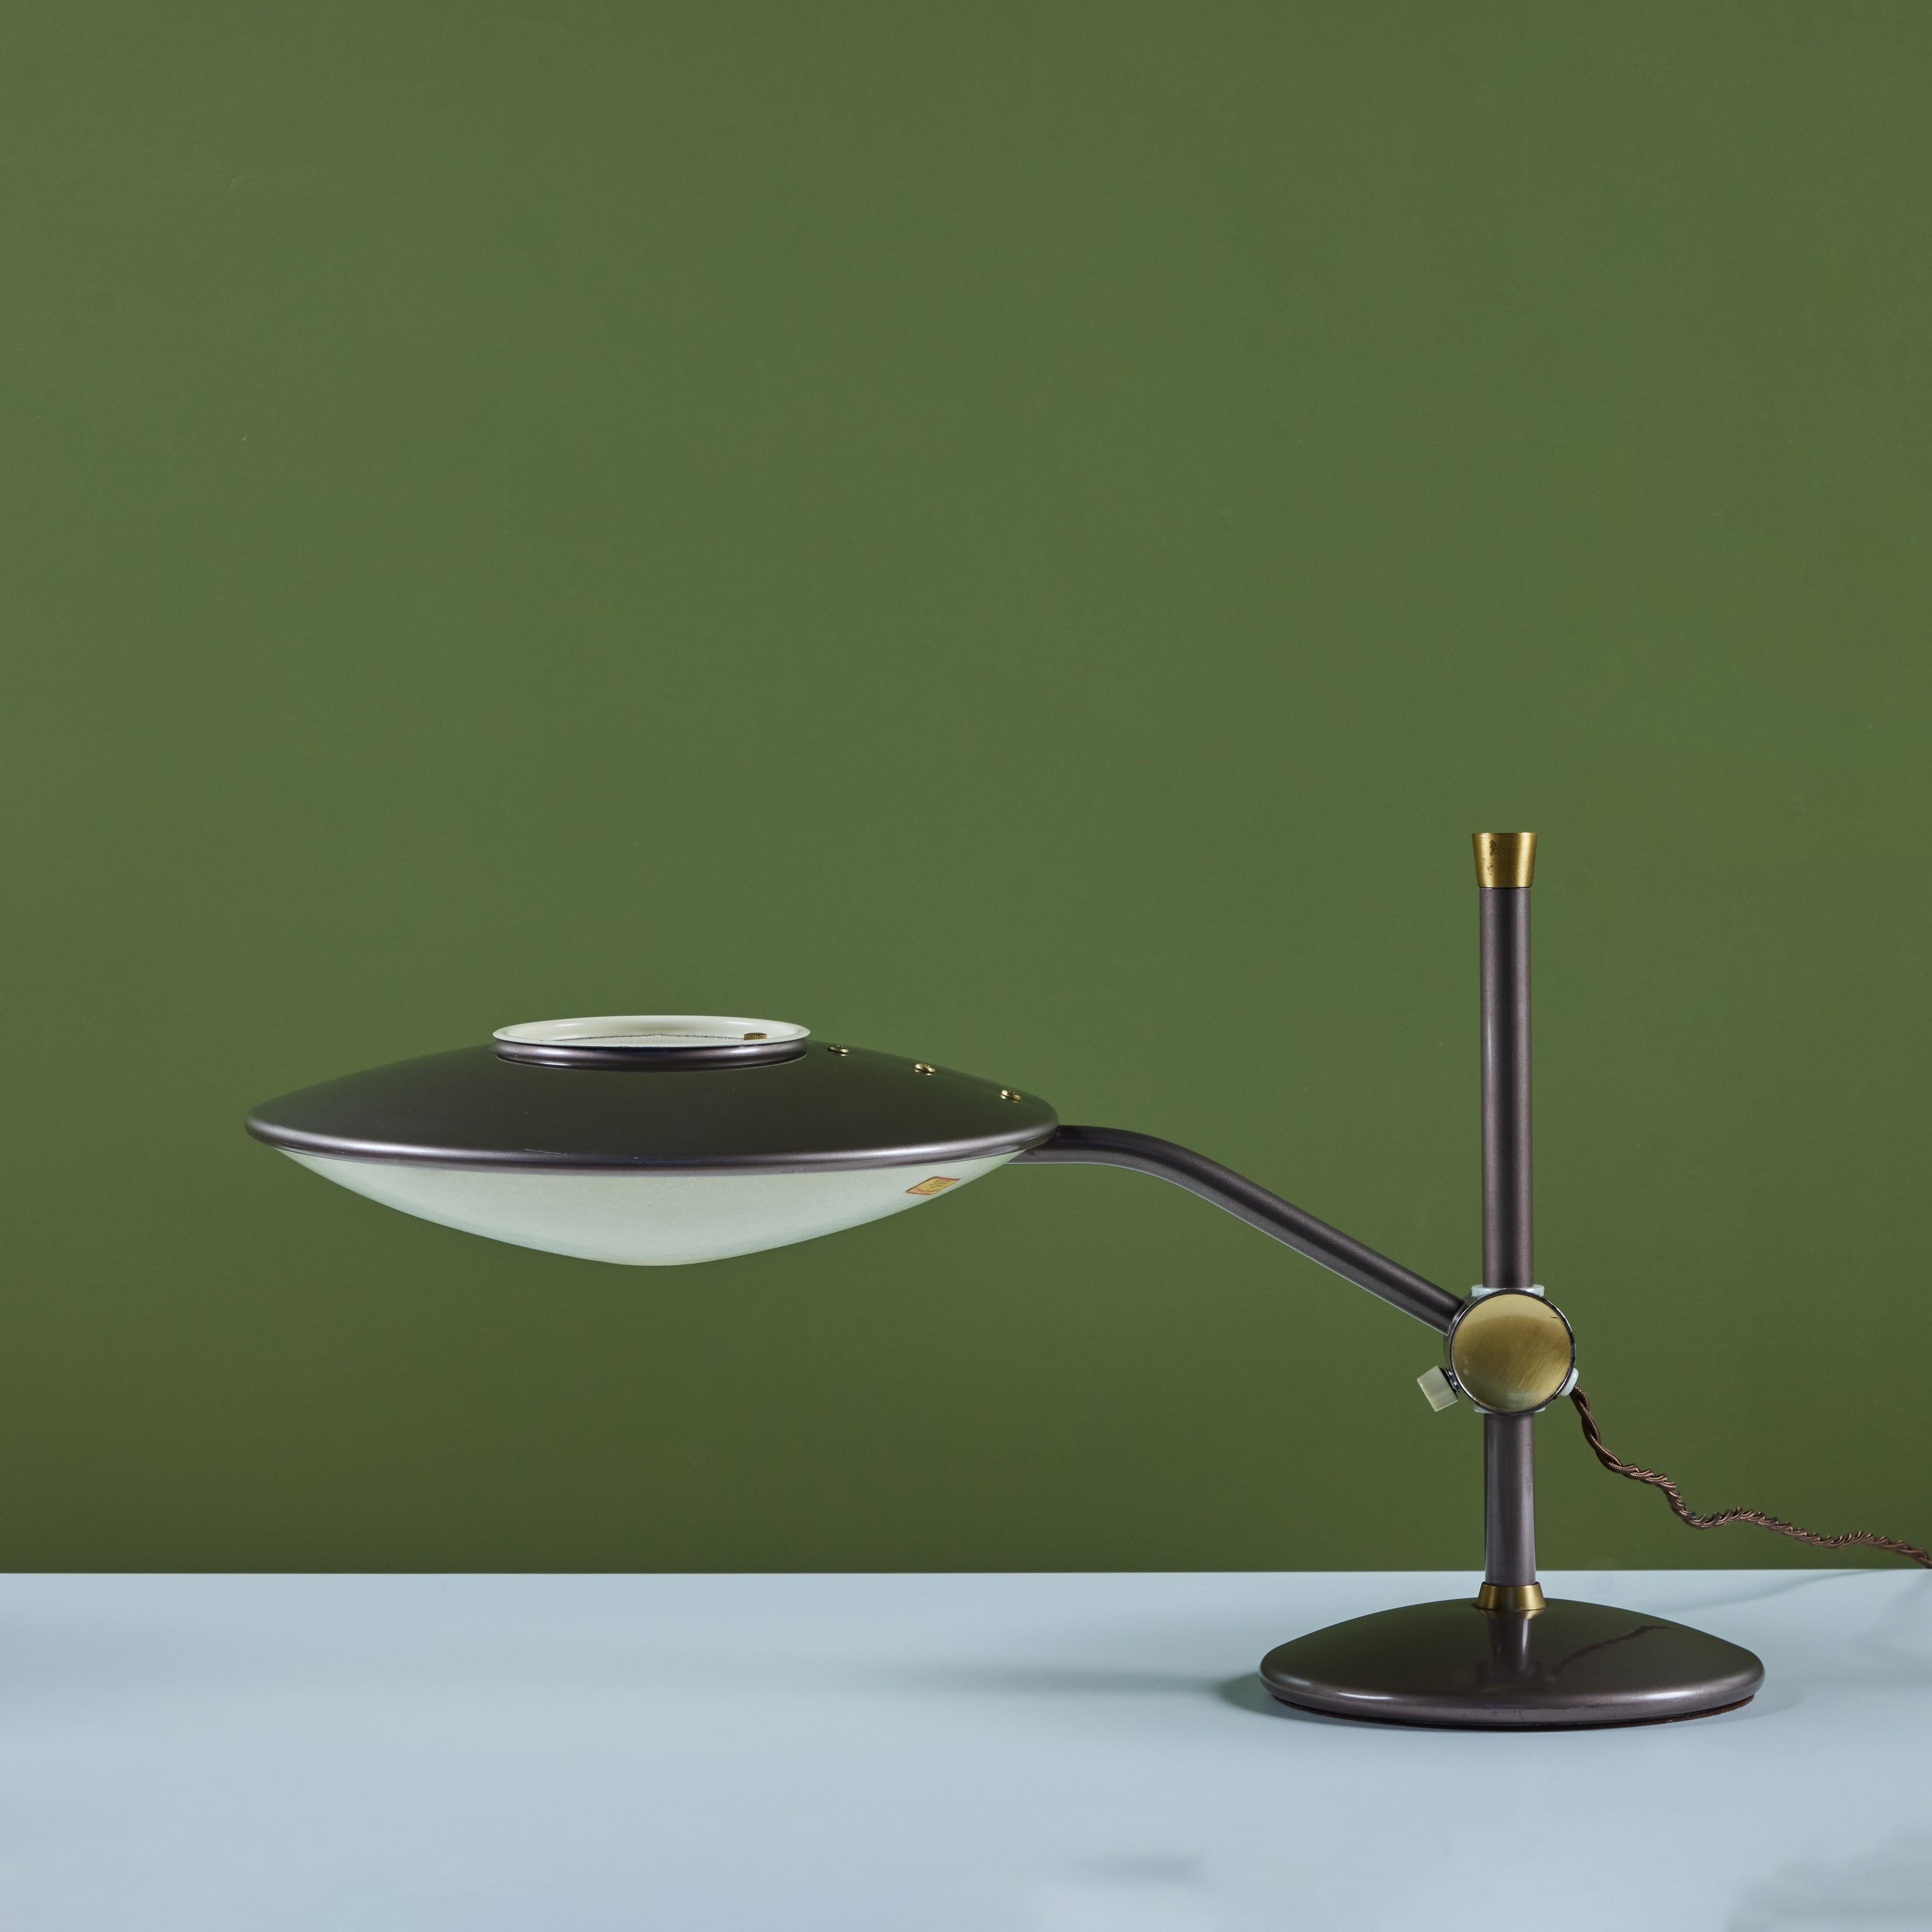 American Dazor Taupe Enamel Desk Lamp with Brass Accents